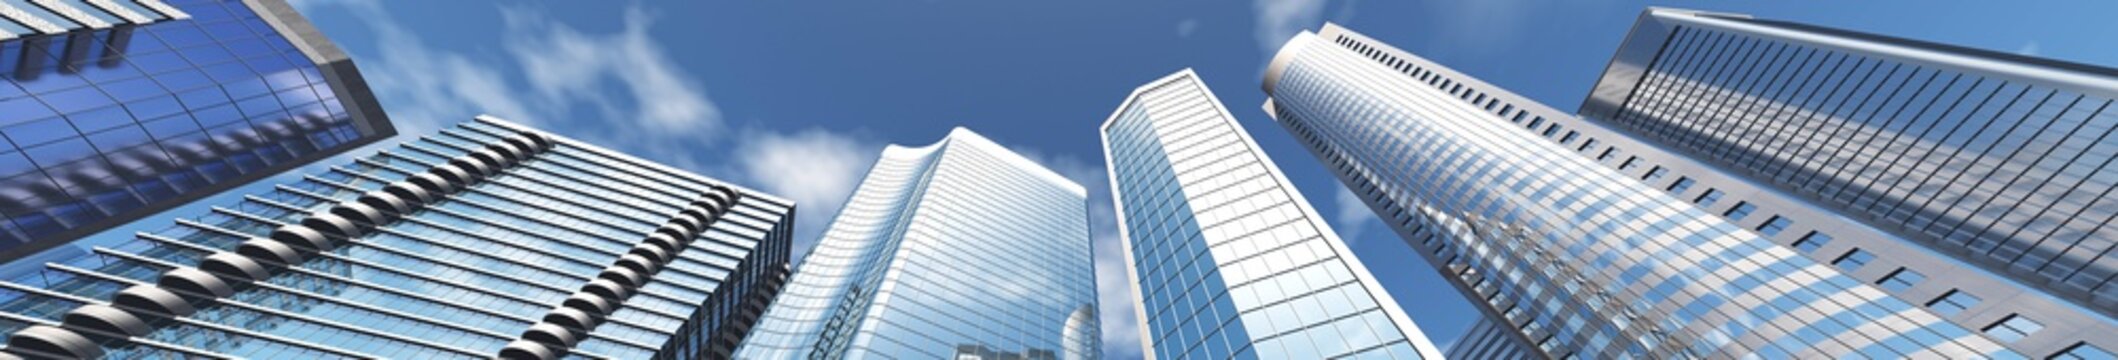 Skyscrapers against the sky, Beautiful view from below on the modern buildings,
3d rendering
